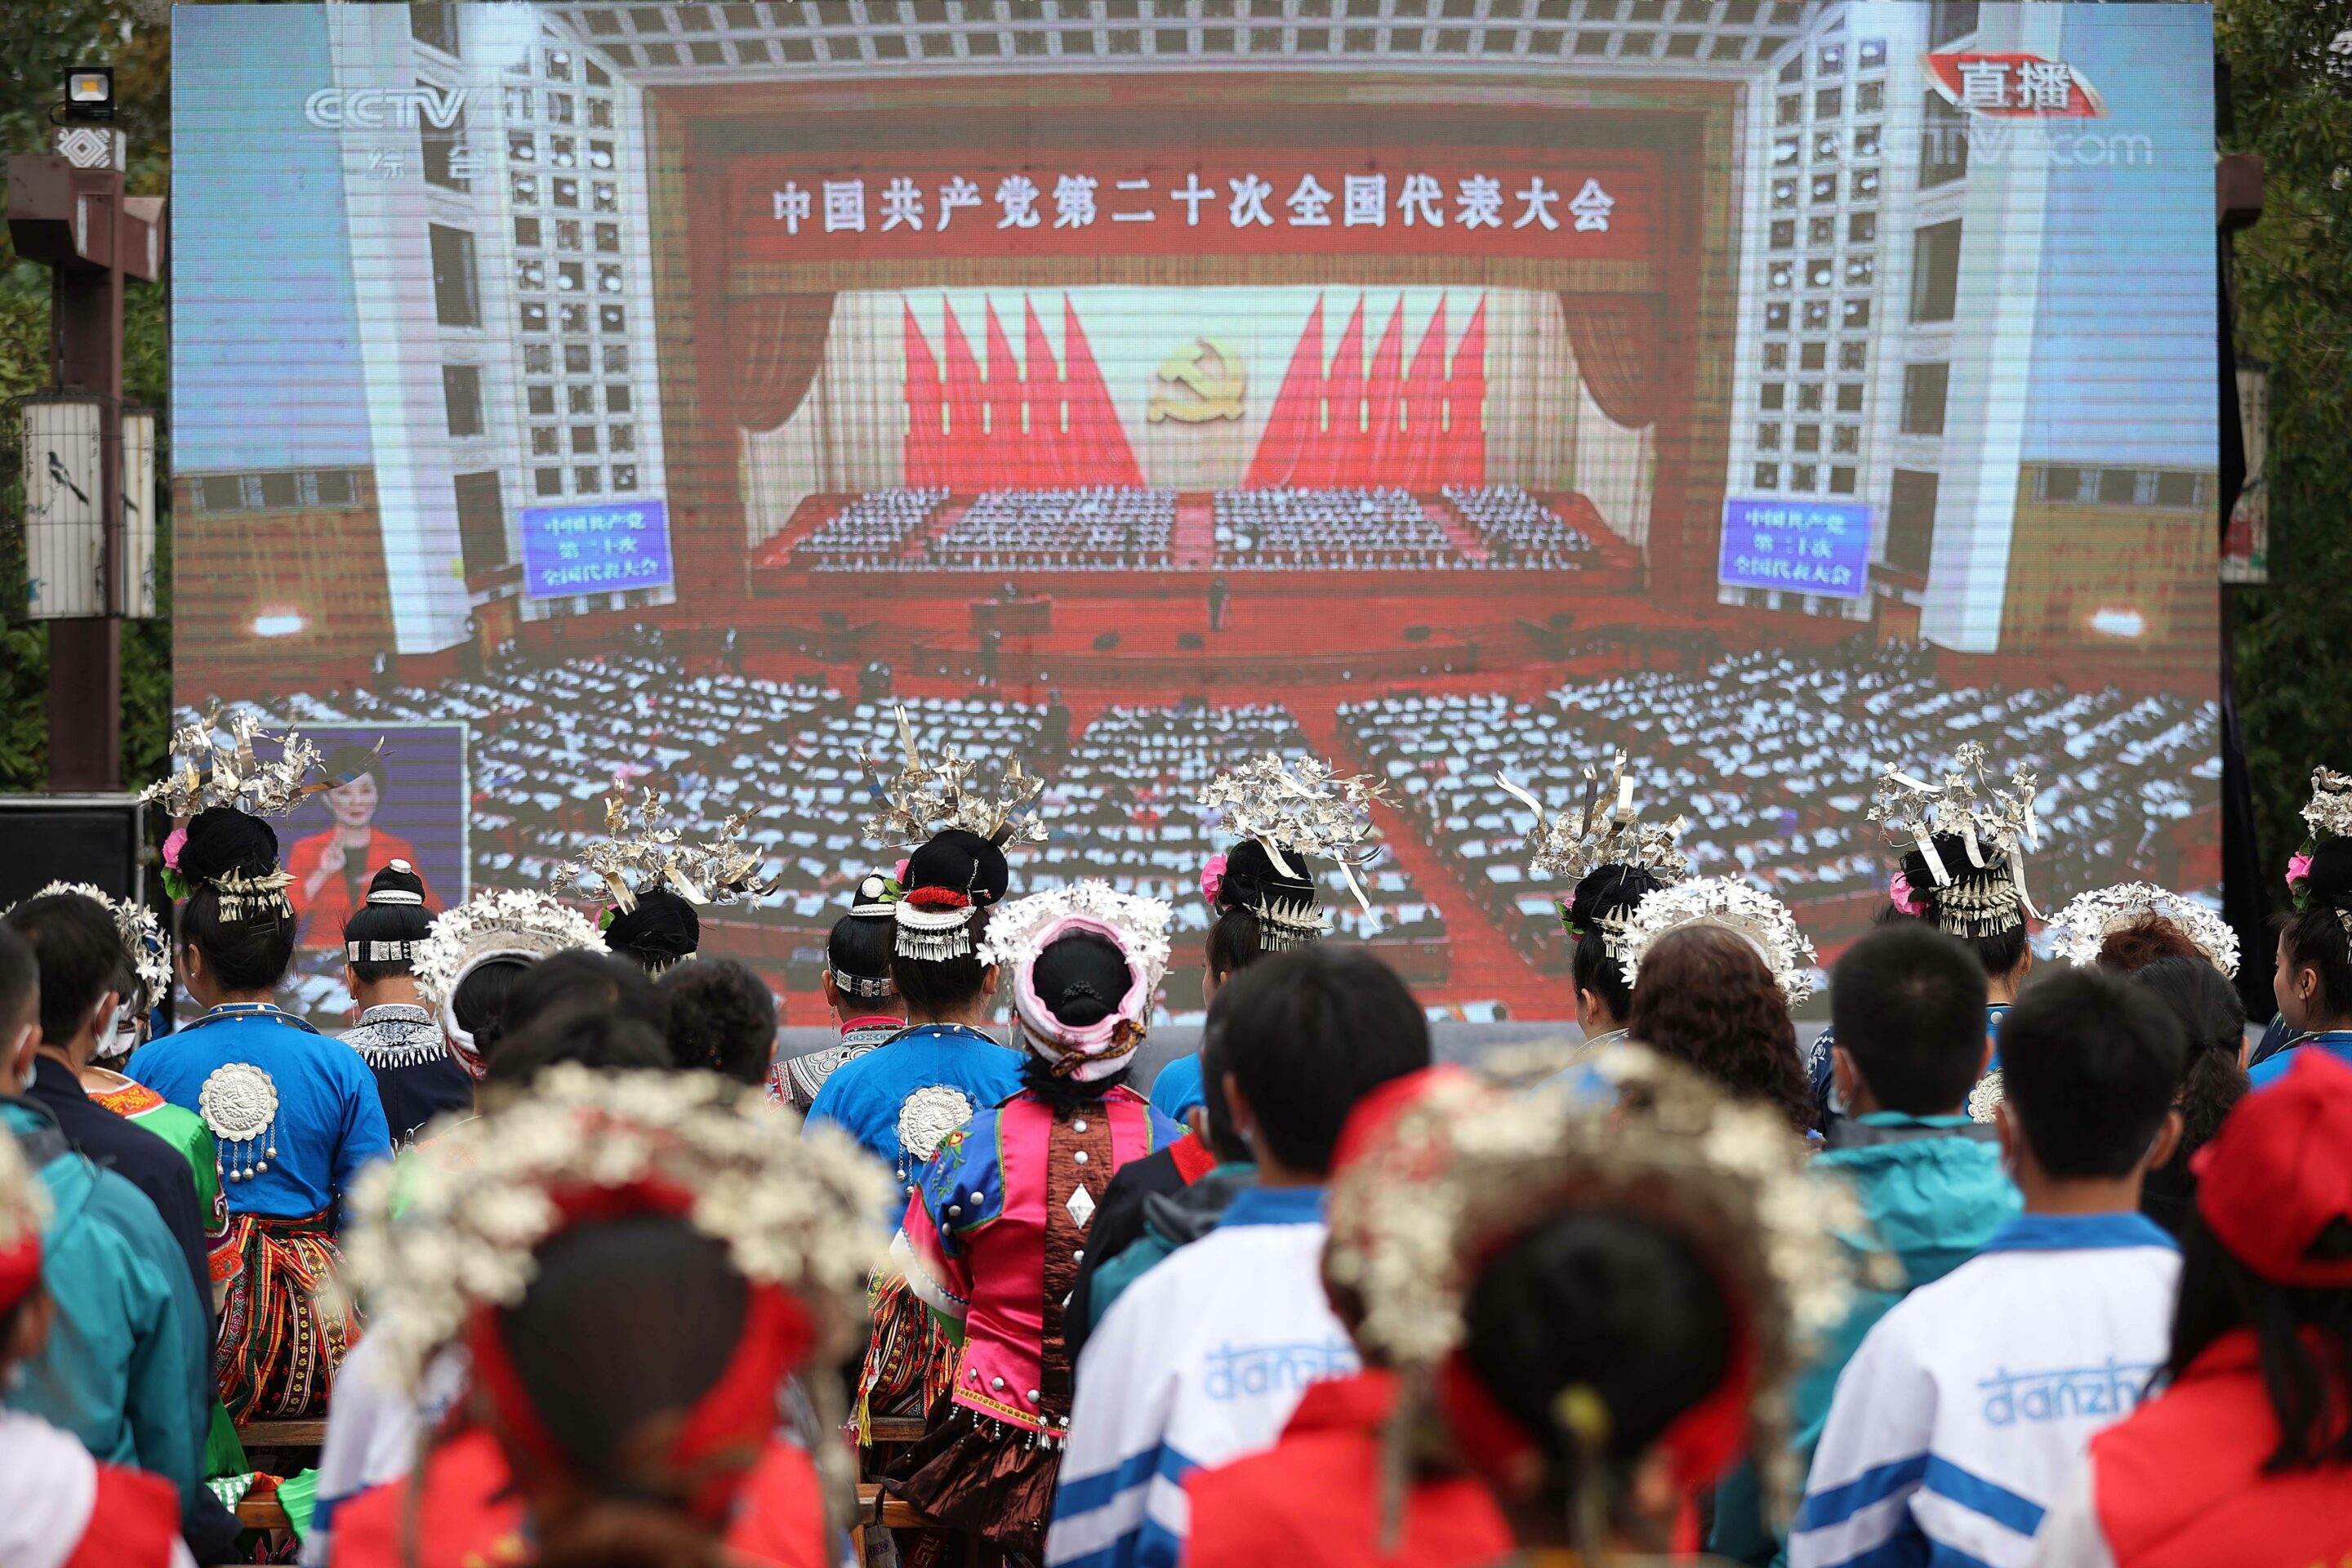 QIANDONGNAN, CHINA - OCTOBER 16, 2022 - Villagers of Miao ethnic group watch the opening ceremony of the 20th National Congress of the Communist Party of China in Qiandongnan Miao and Dong autonomous prefecture, Guizhou Province, China, Oct 16, 2022. (Photo by CFOTO/Sipa USA)/42126051//2210161057